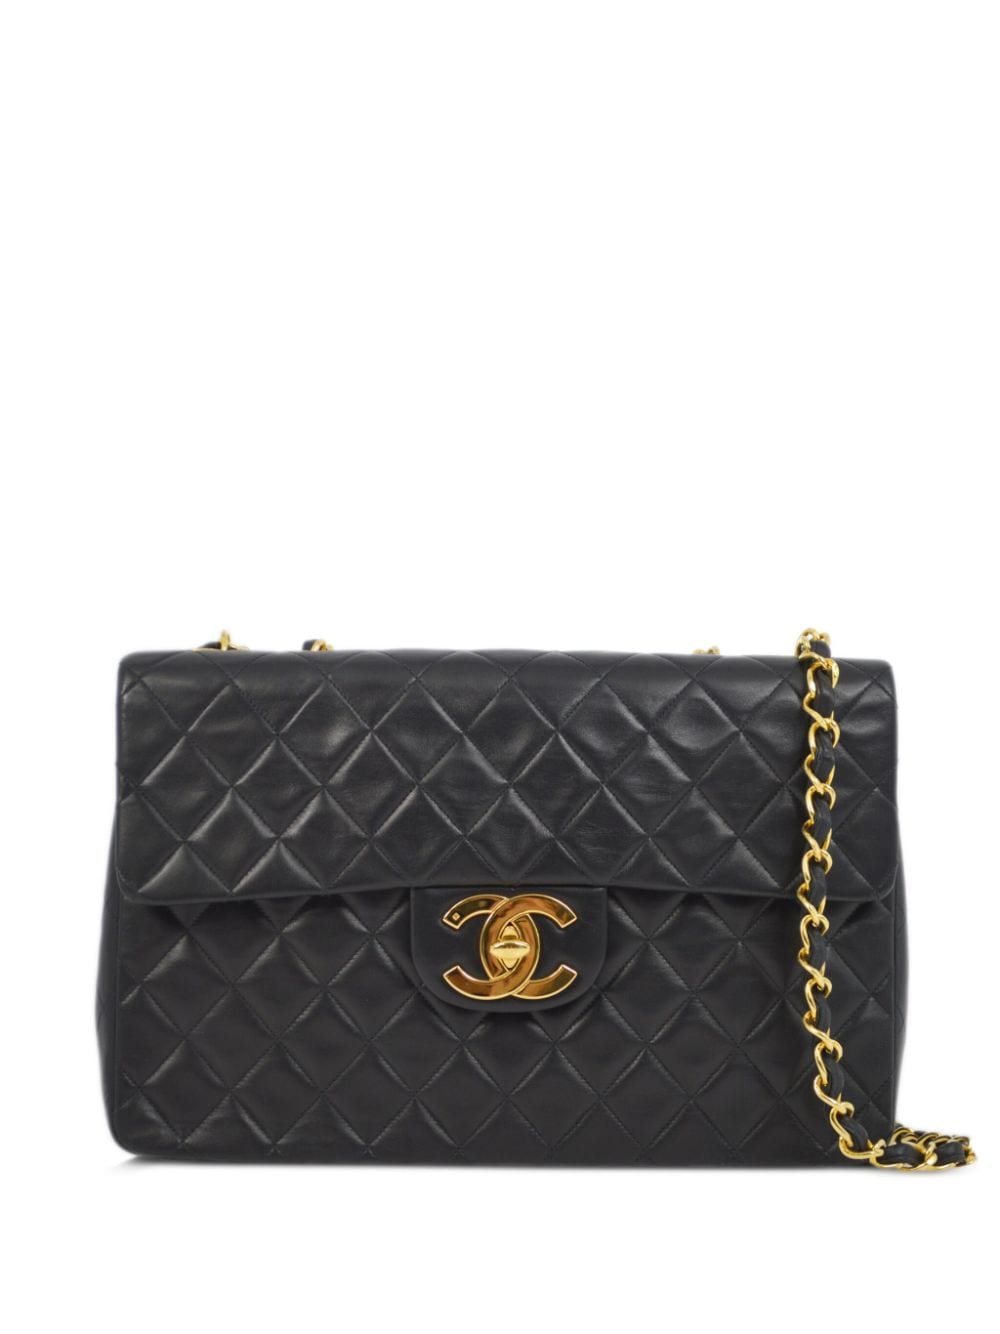 Pre-owned Chanel 1995 Maxi Classic Flap Shoulder Bag In Black